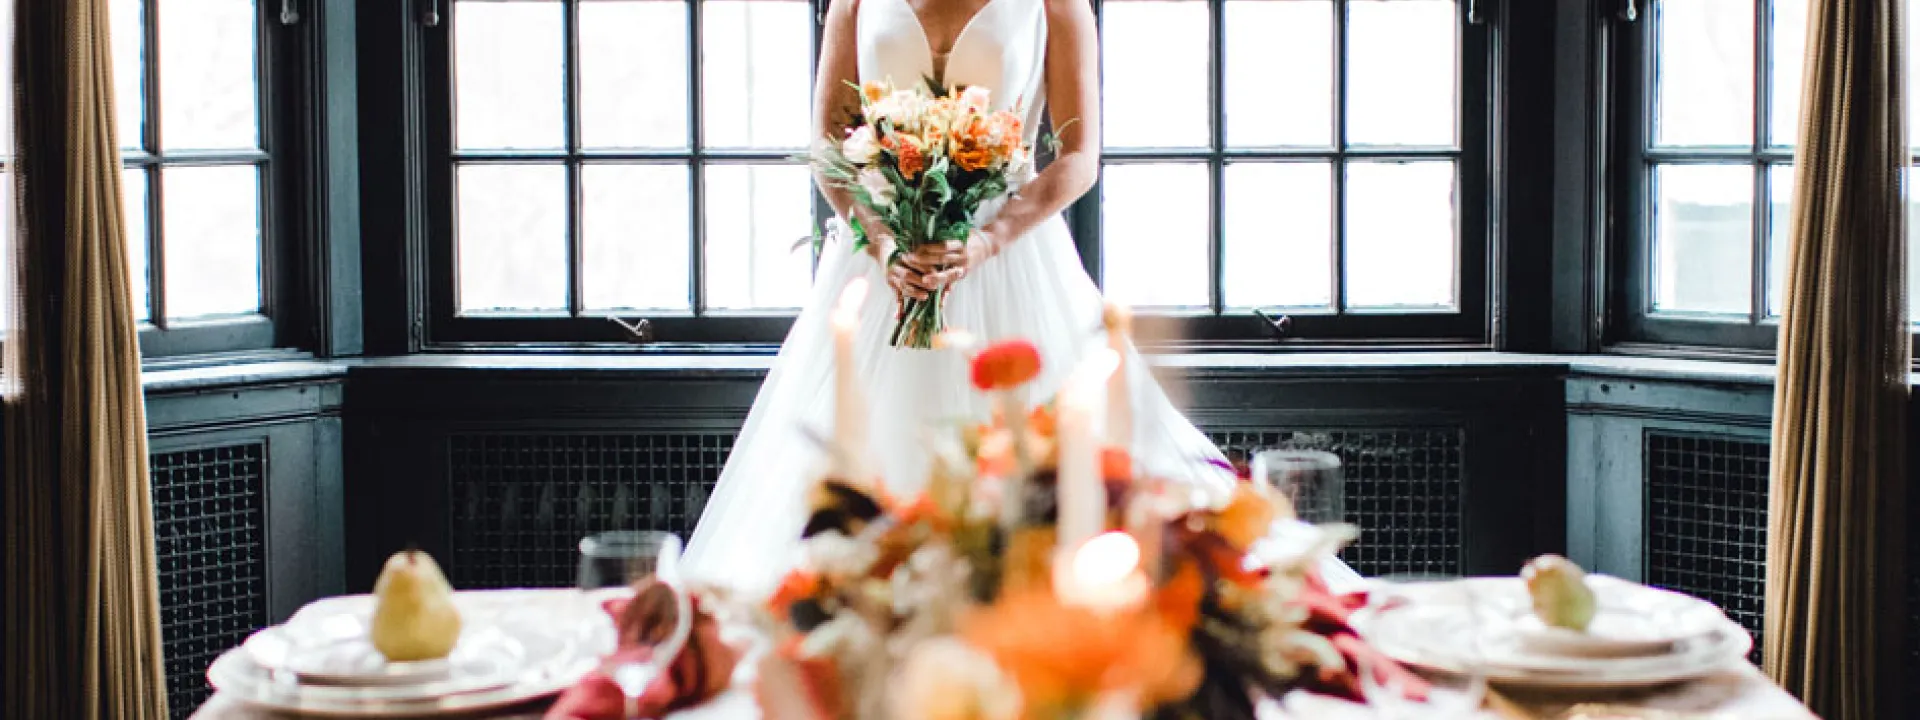 The bride stands at the head of a table bedecked with fall foliage in a grand room at The University Club of Portland